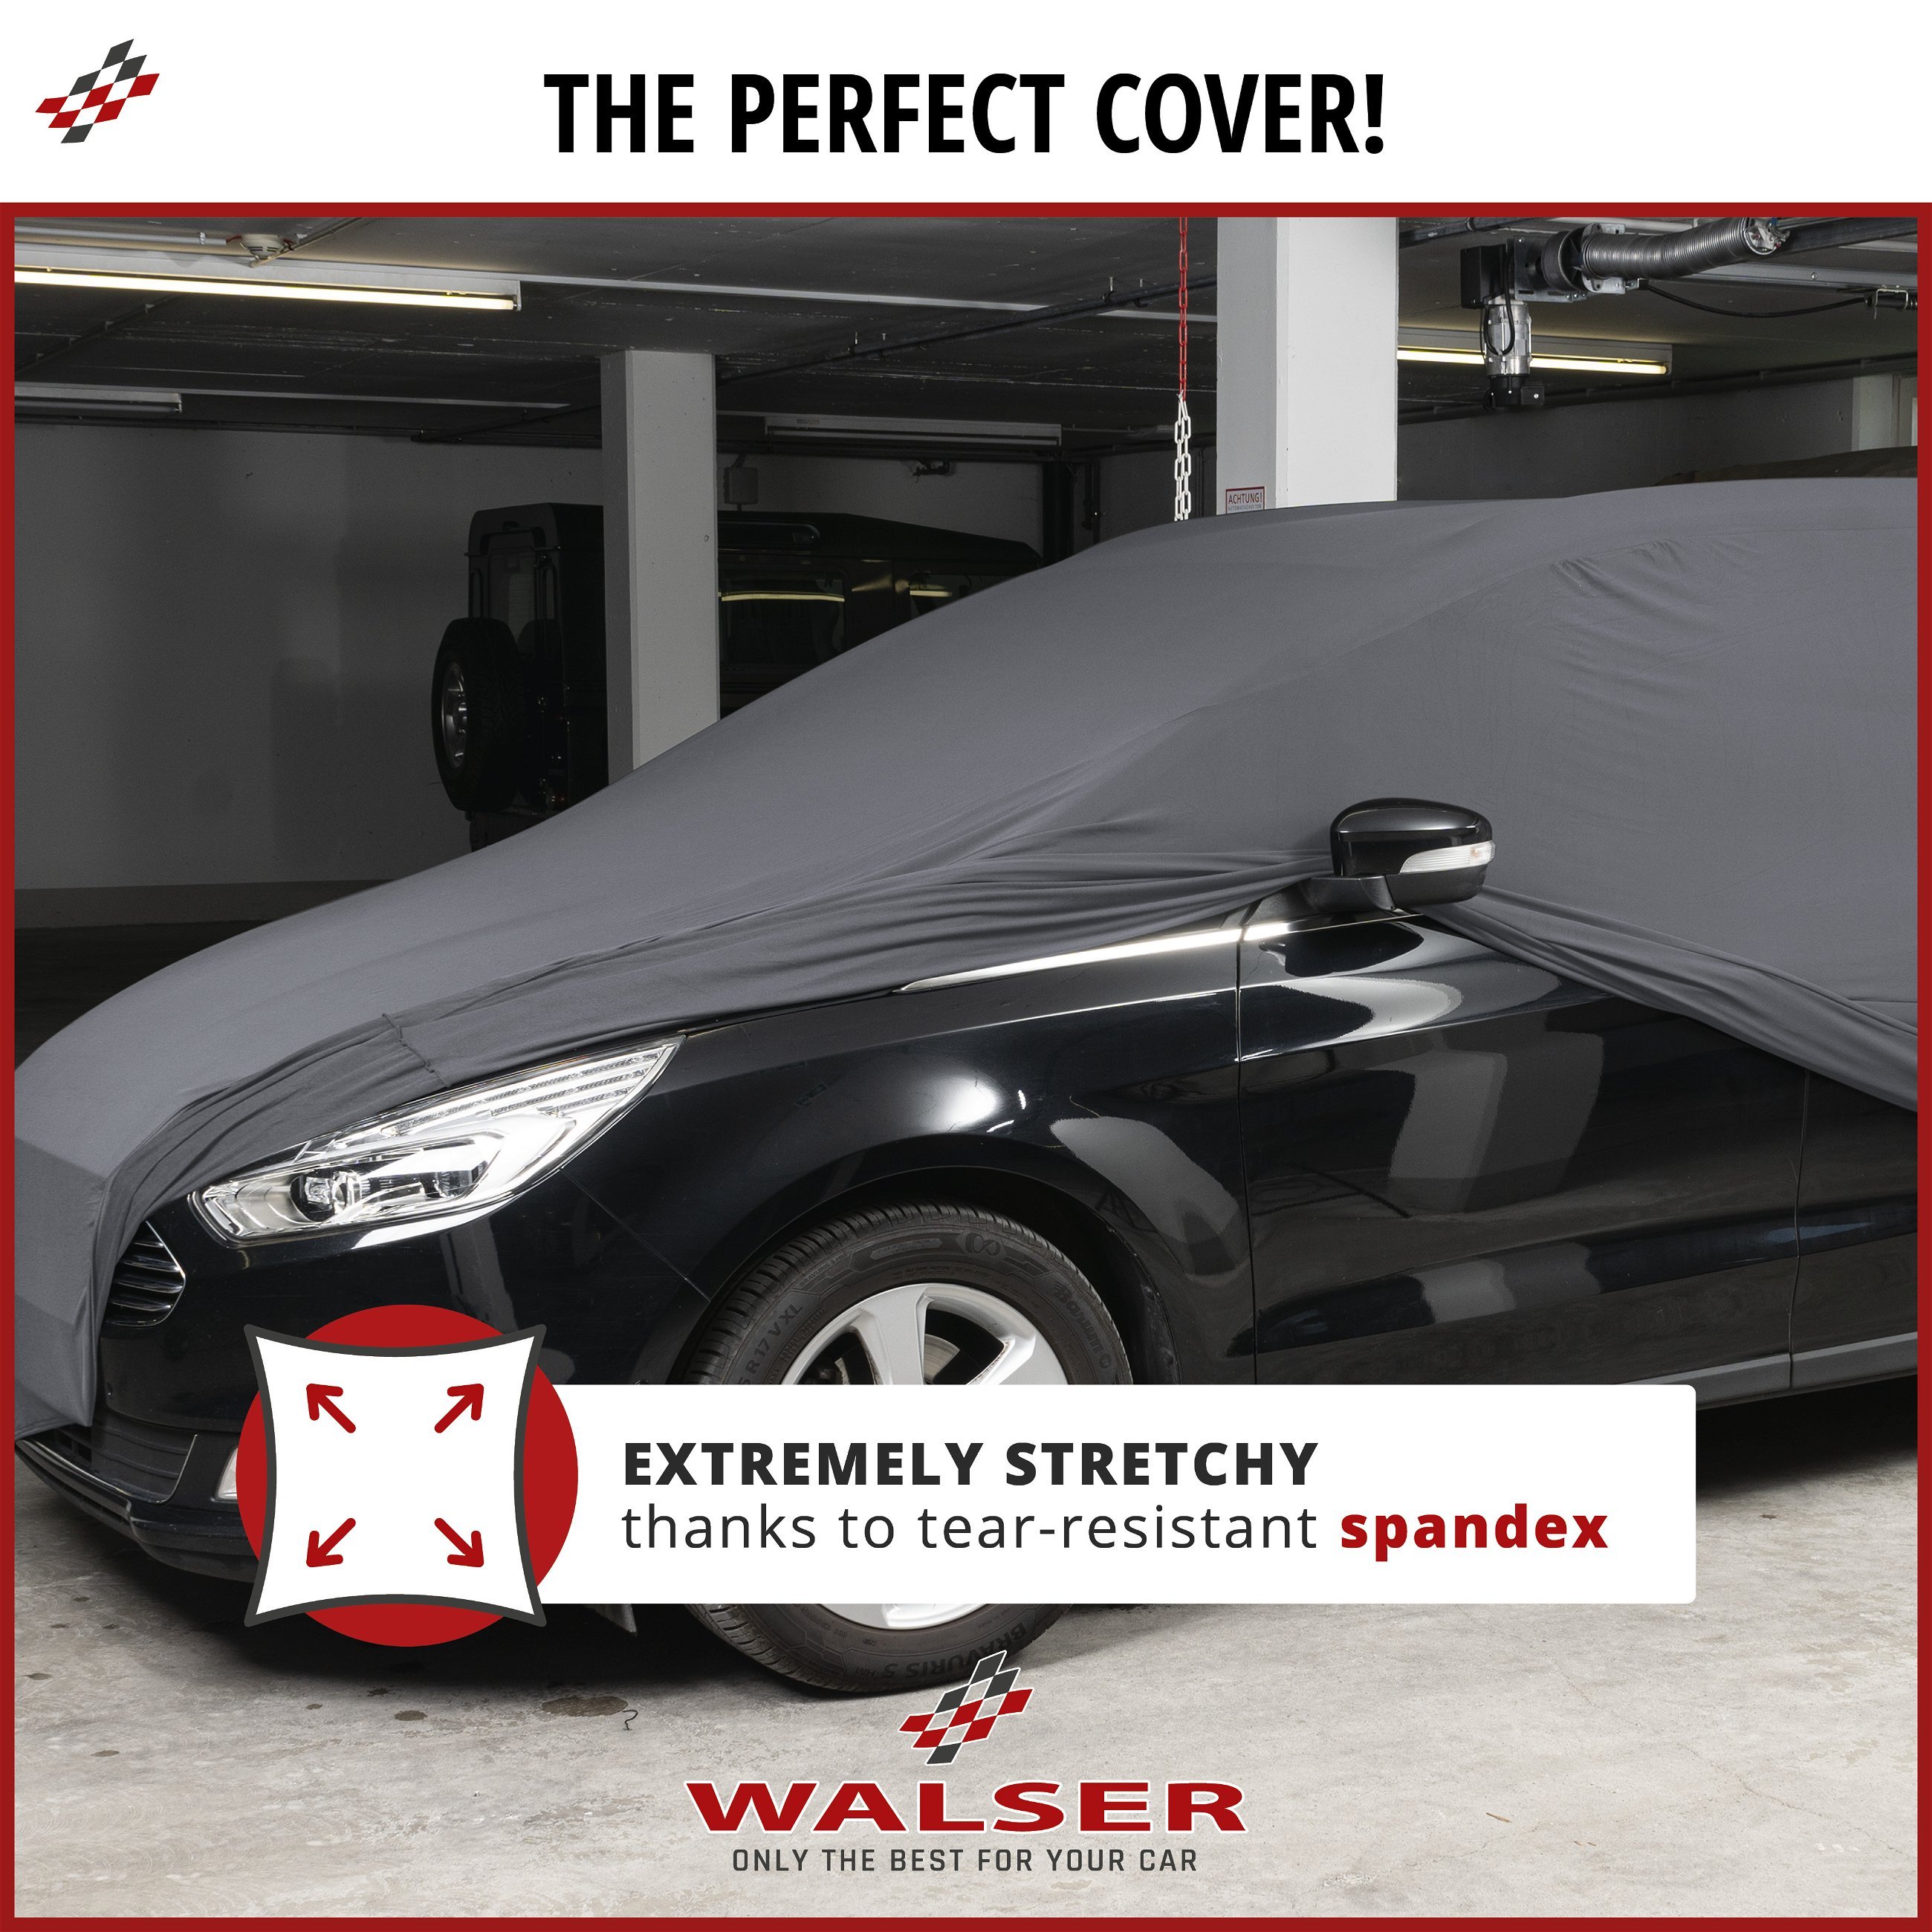 Car cover Indoor Stretch Plus SUV size S anthracite